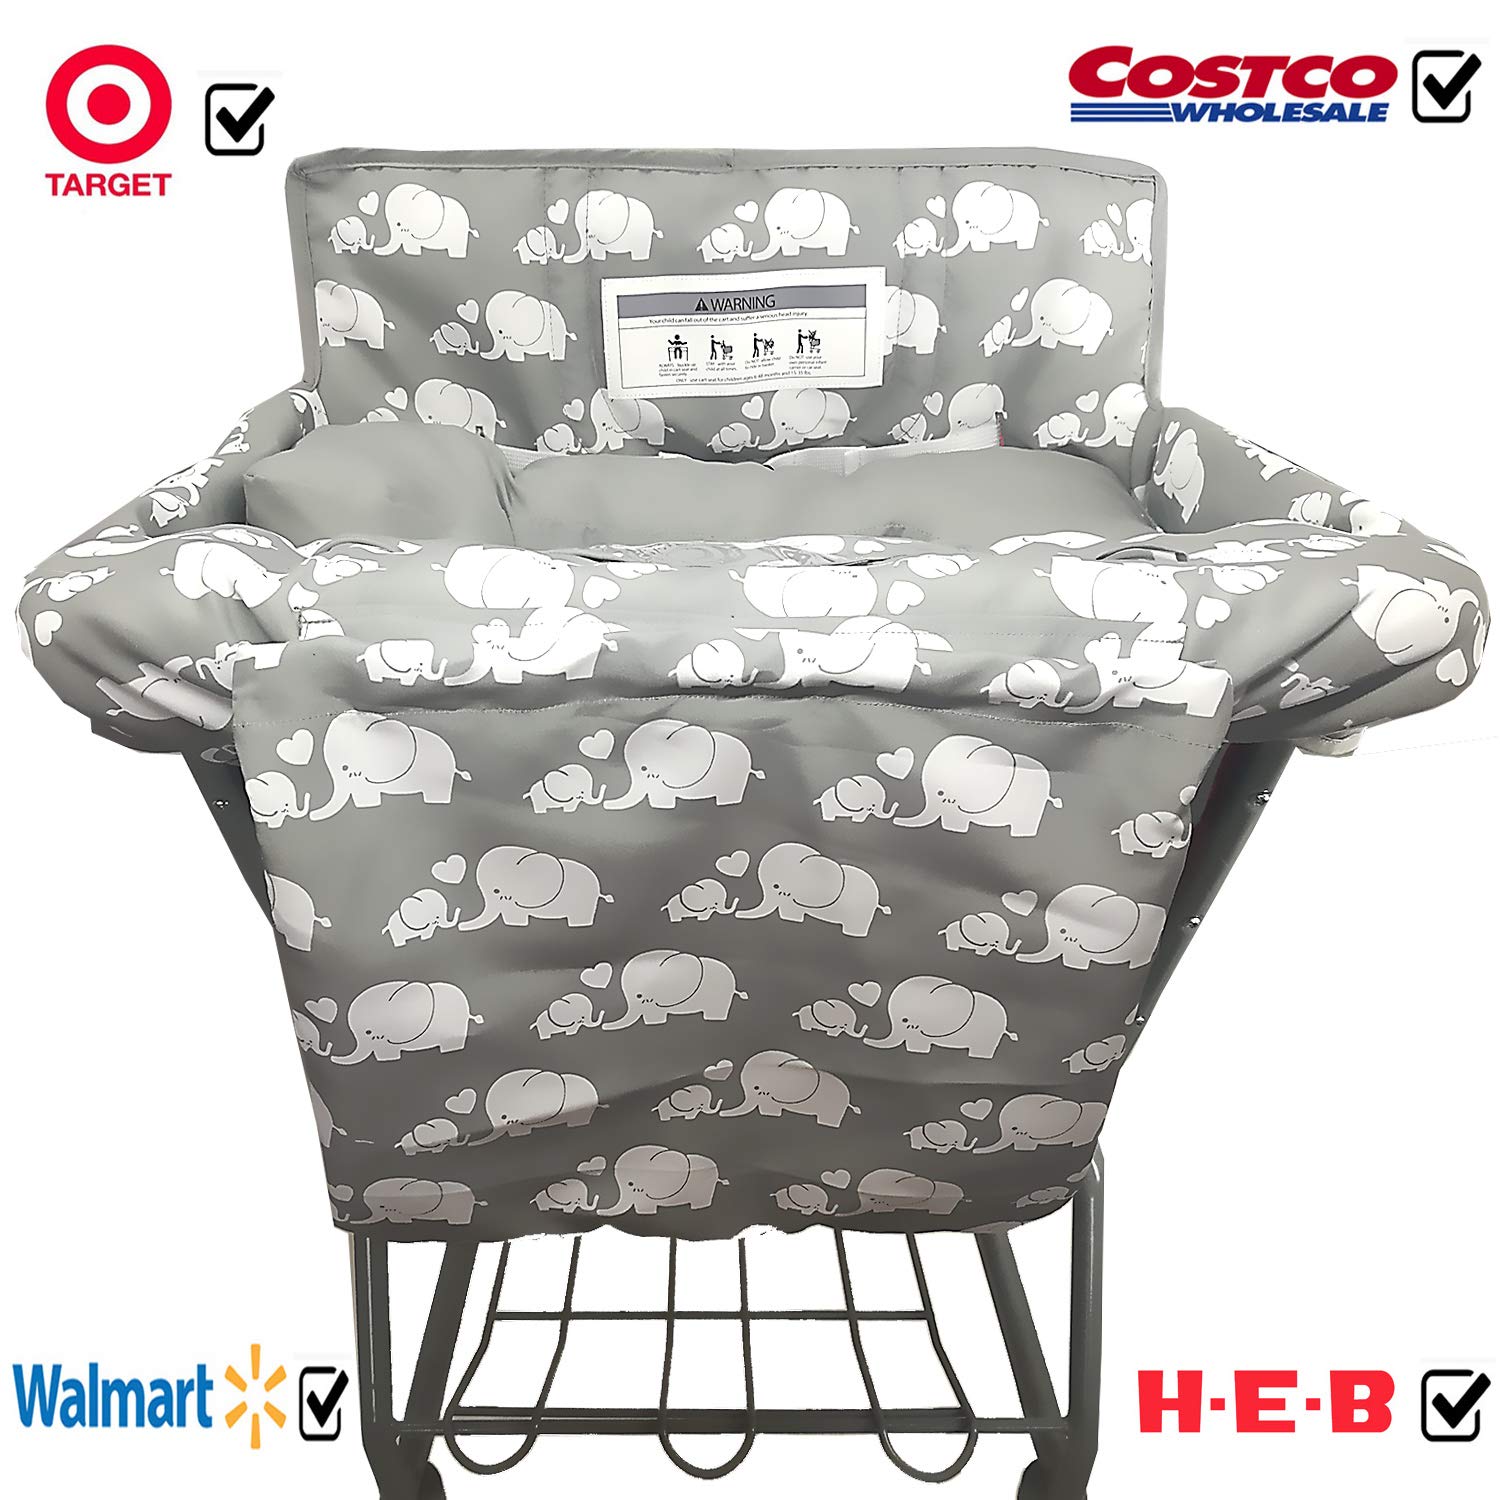 Acplaypen Soft Pillow Attached 2-in-1 Shopping Cart and High Chair Cover for Baby~Padded~Fold'n Roll Style~Portable with Free Carry Bag (Elephant)